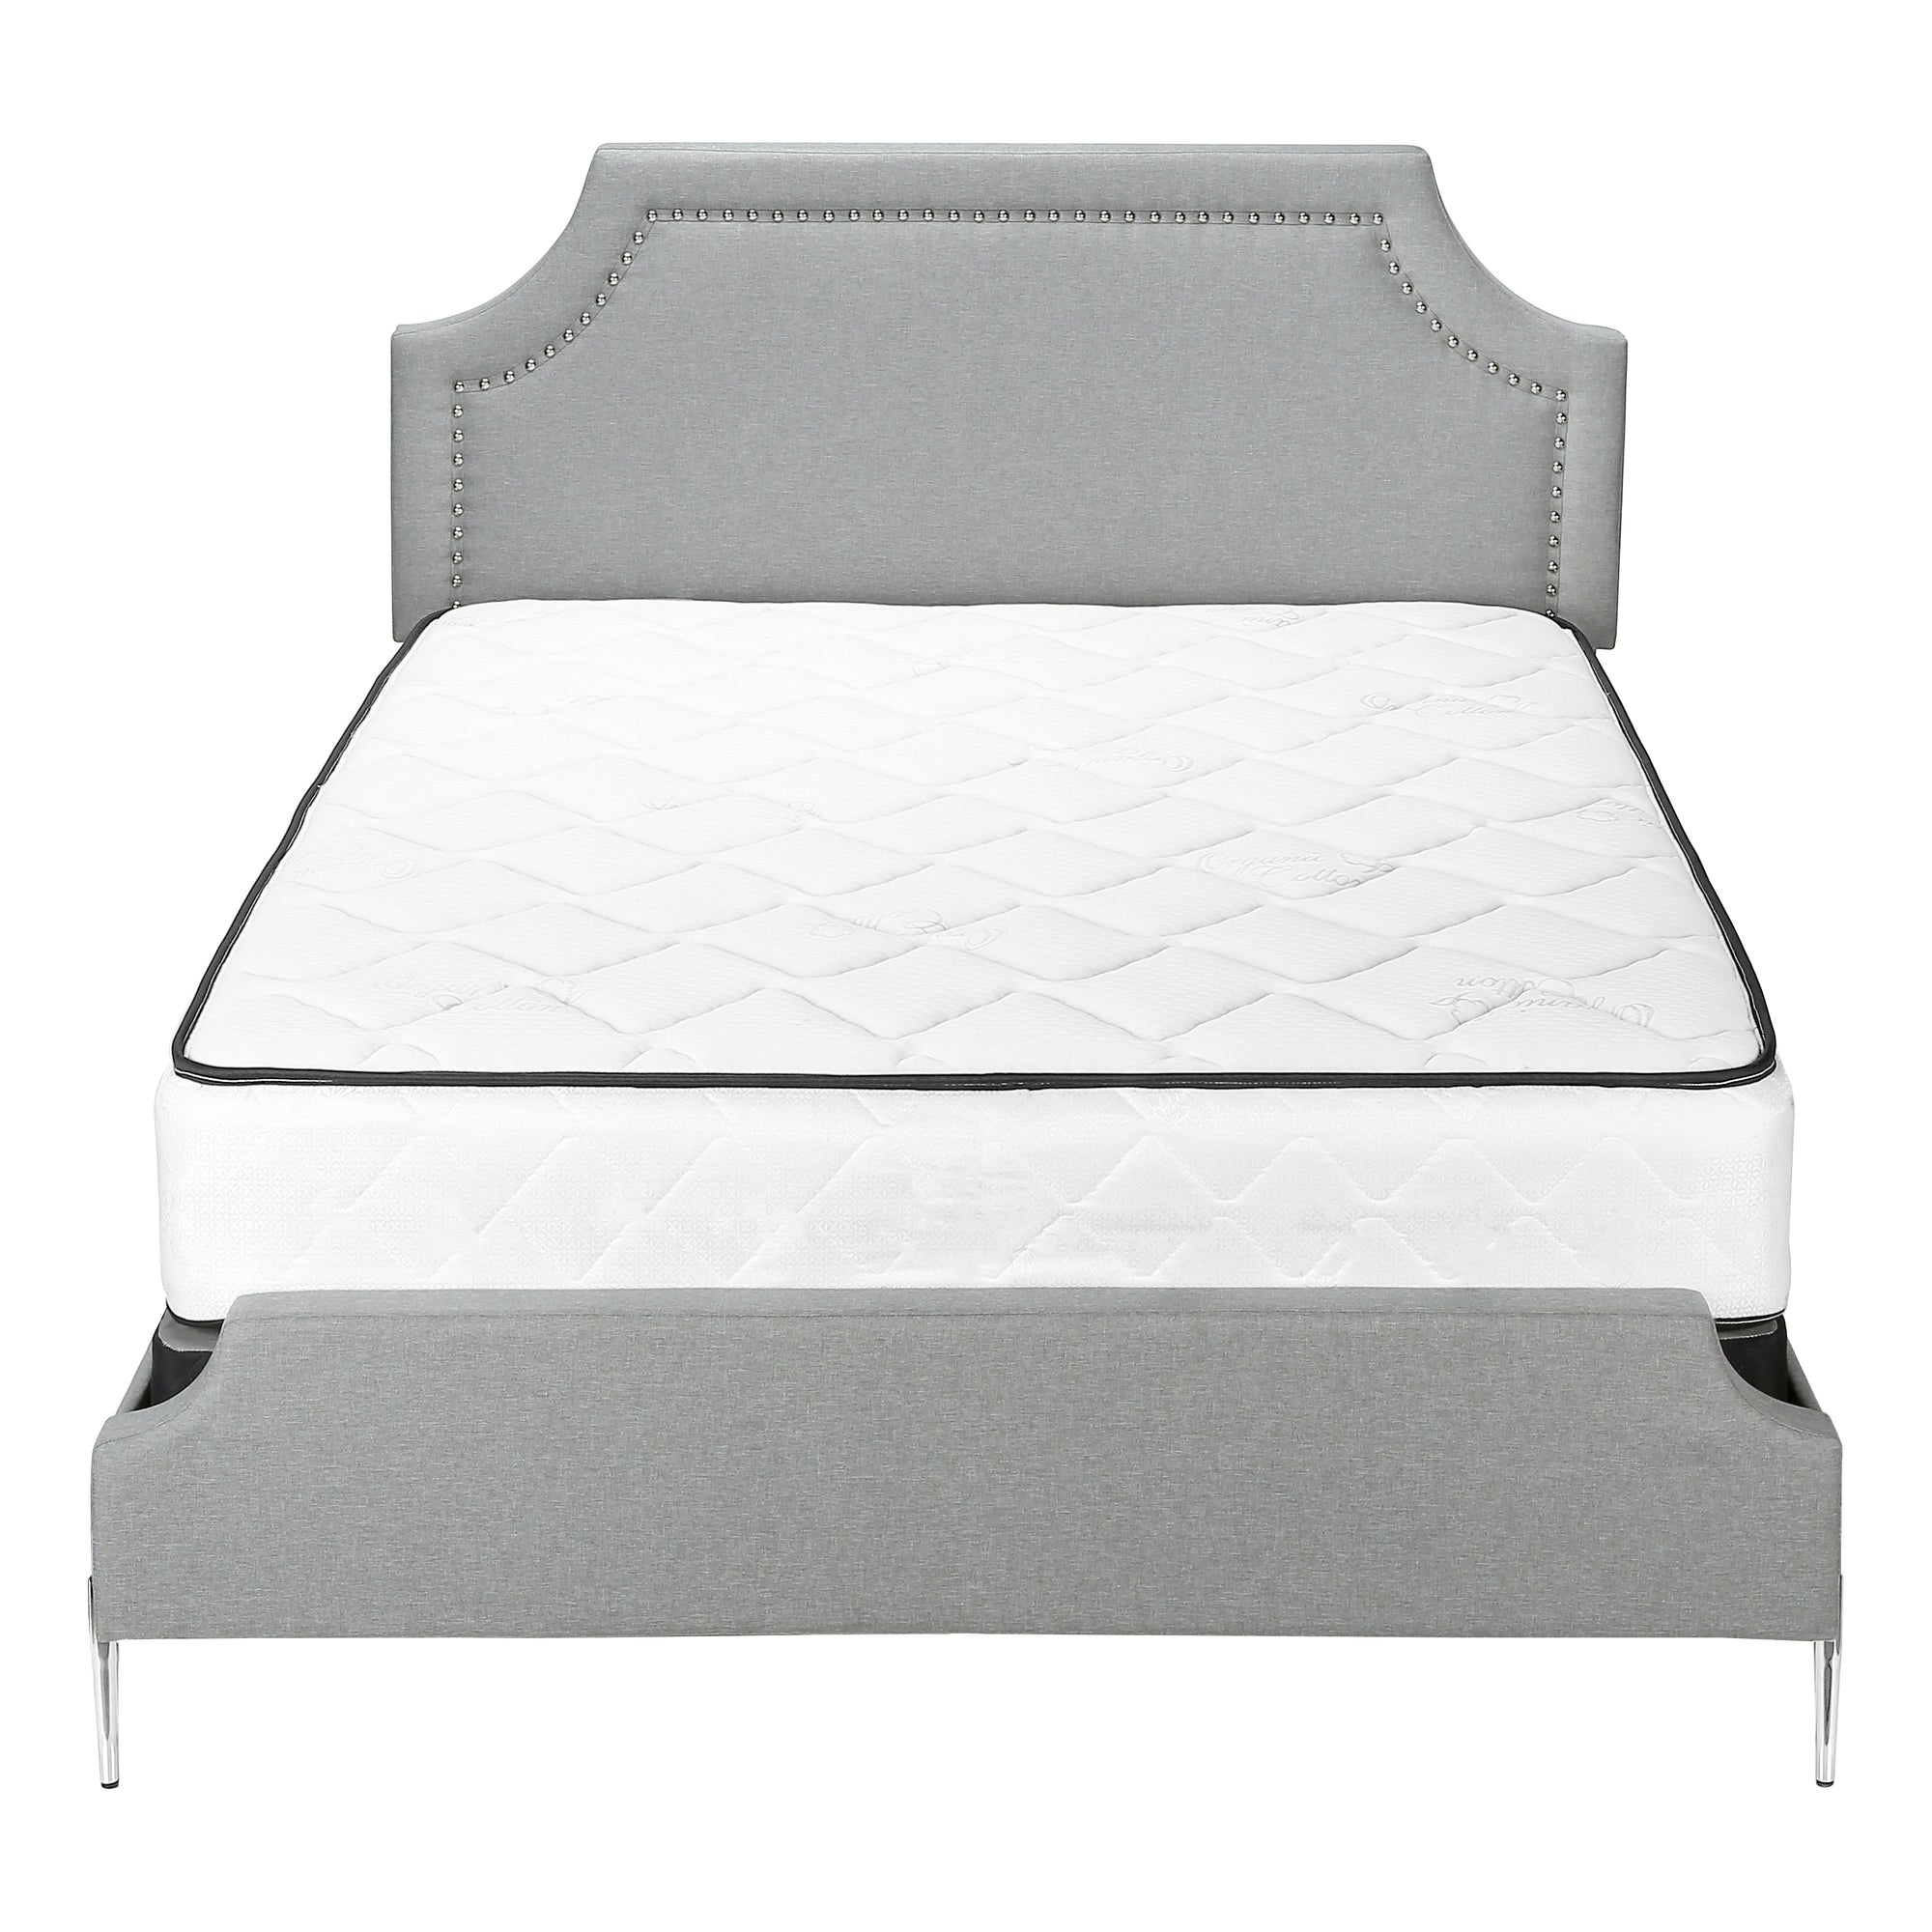 BED - QUEEN SIZE / GREY LINEN WITH CHROME METAL LEGS